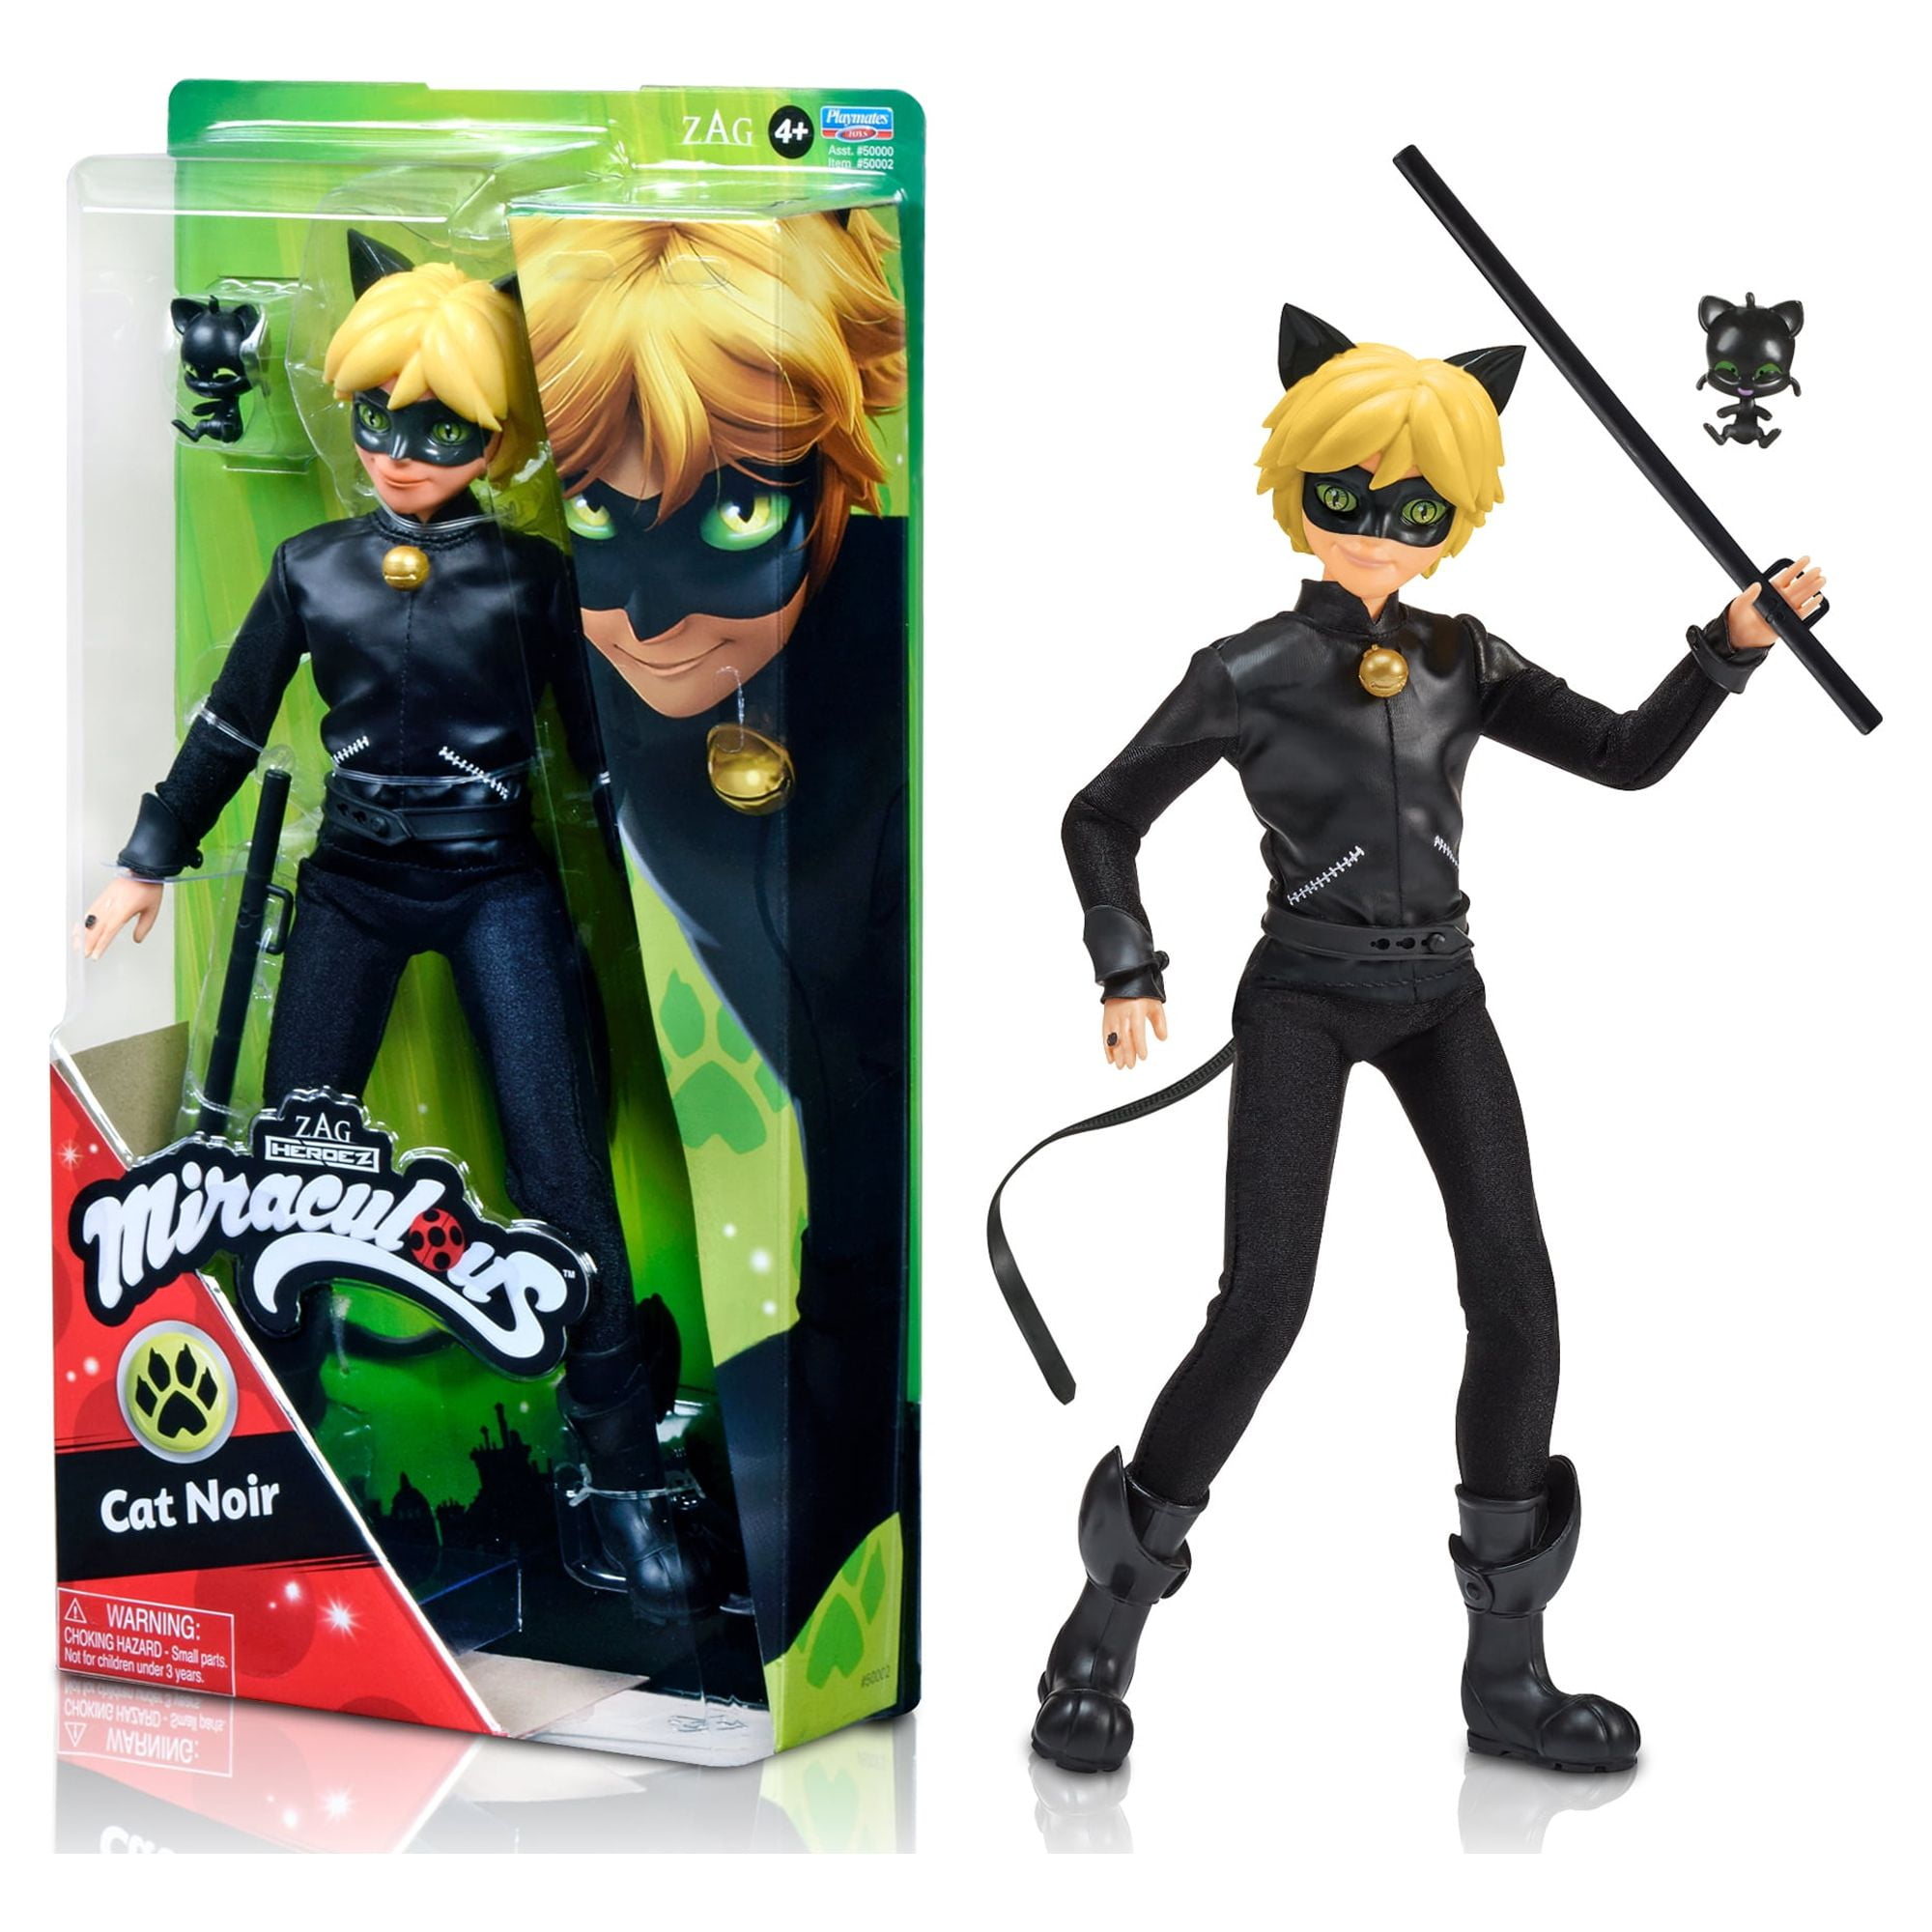 Miraculous Dolls - I finally got my collection going. I found some of